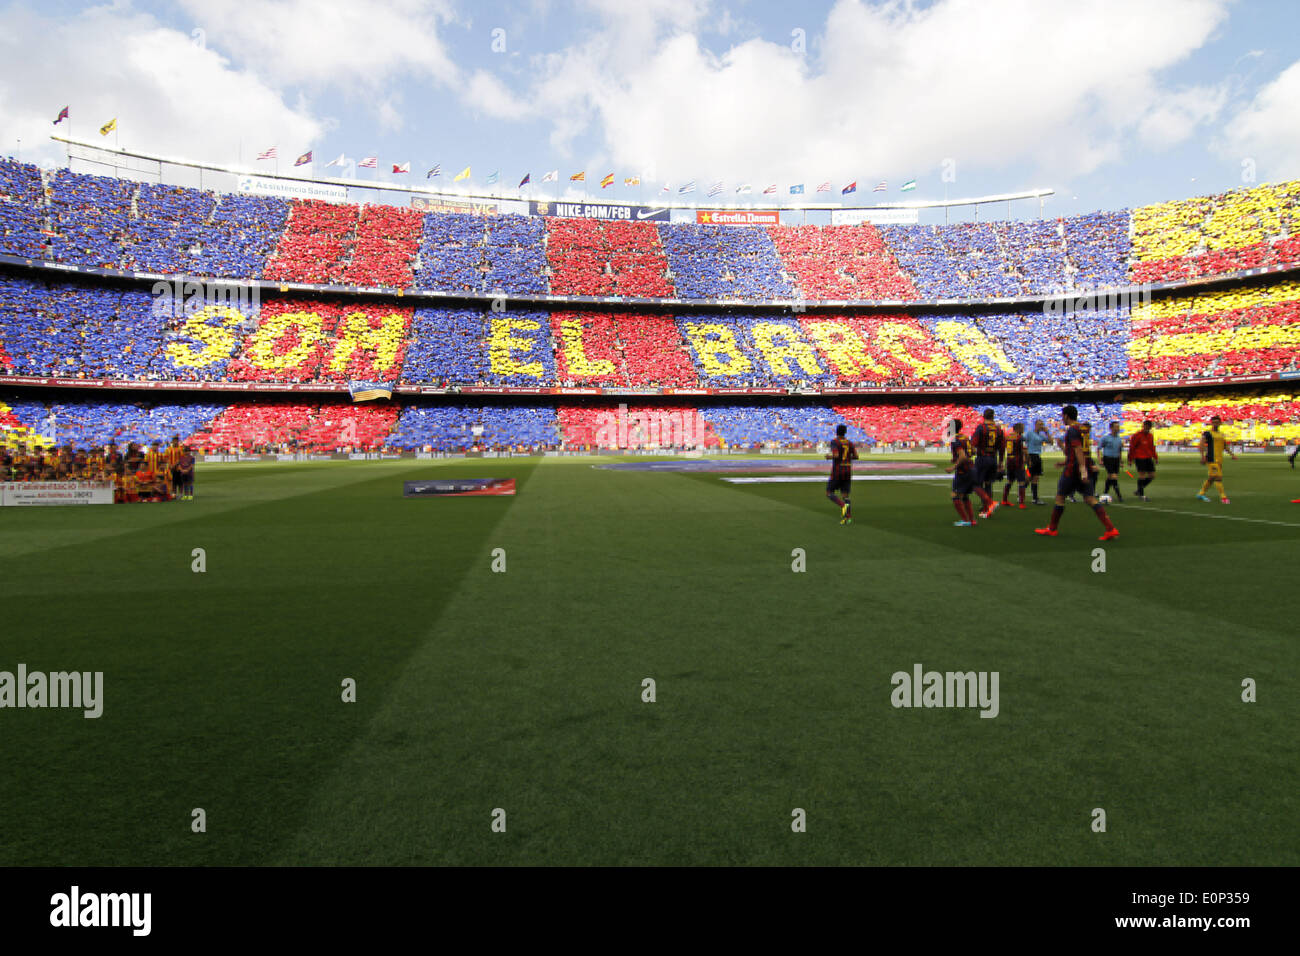 Barcelona, Spain. 17th May, 2014. supporters in the match between FC Barcelona and Atletico de Madrid, for Week 38 of the spanish Liga BBVA played at the Camp Nou, May 17, 2014. Photo: Joan Valls/Urbanandsport/Nurphoto. Credit:  Joan Valls/NurPhoto/ZUMAPRESS.com/Alamy Live News Stock Photo